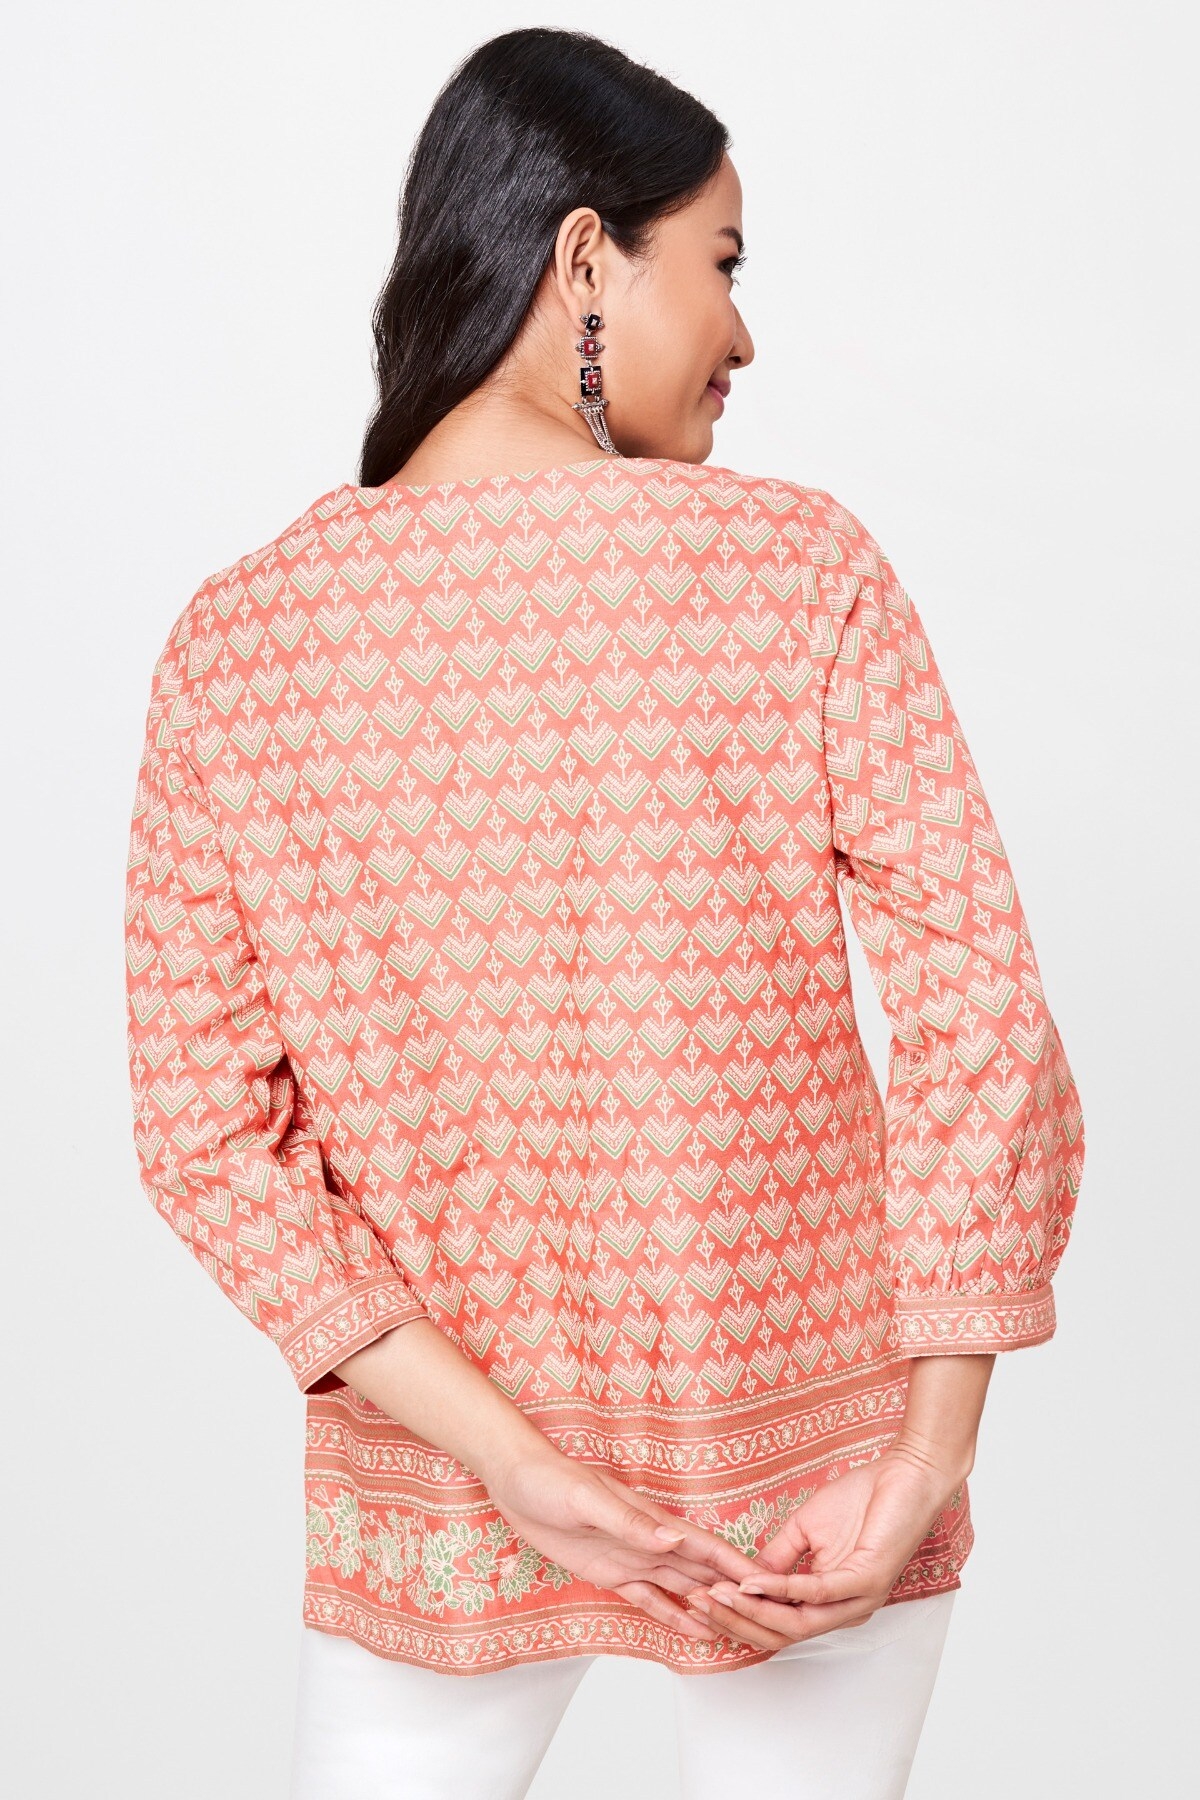 Global Desi | Pink Floral Round Neck Fit and Flare Top 2